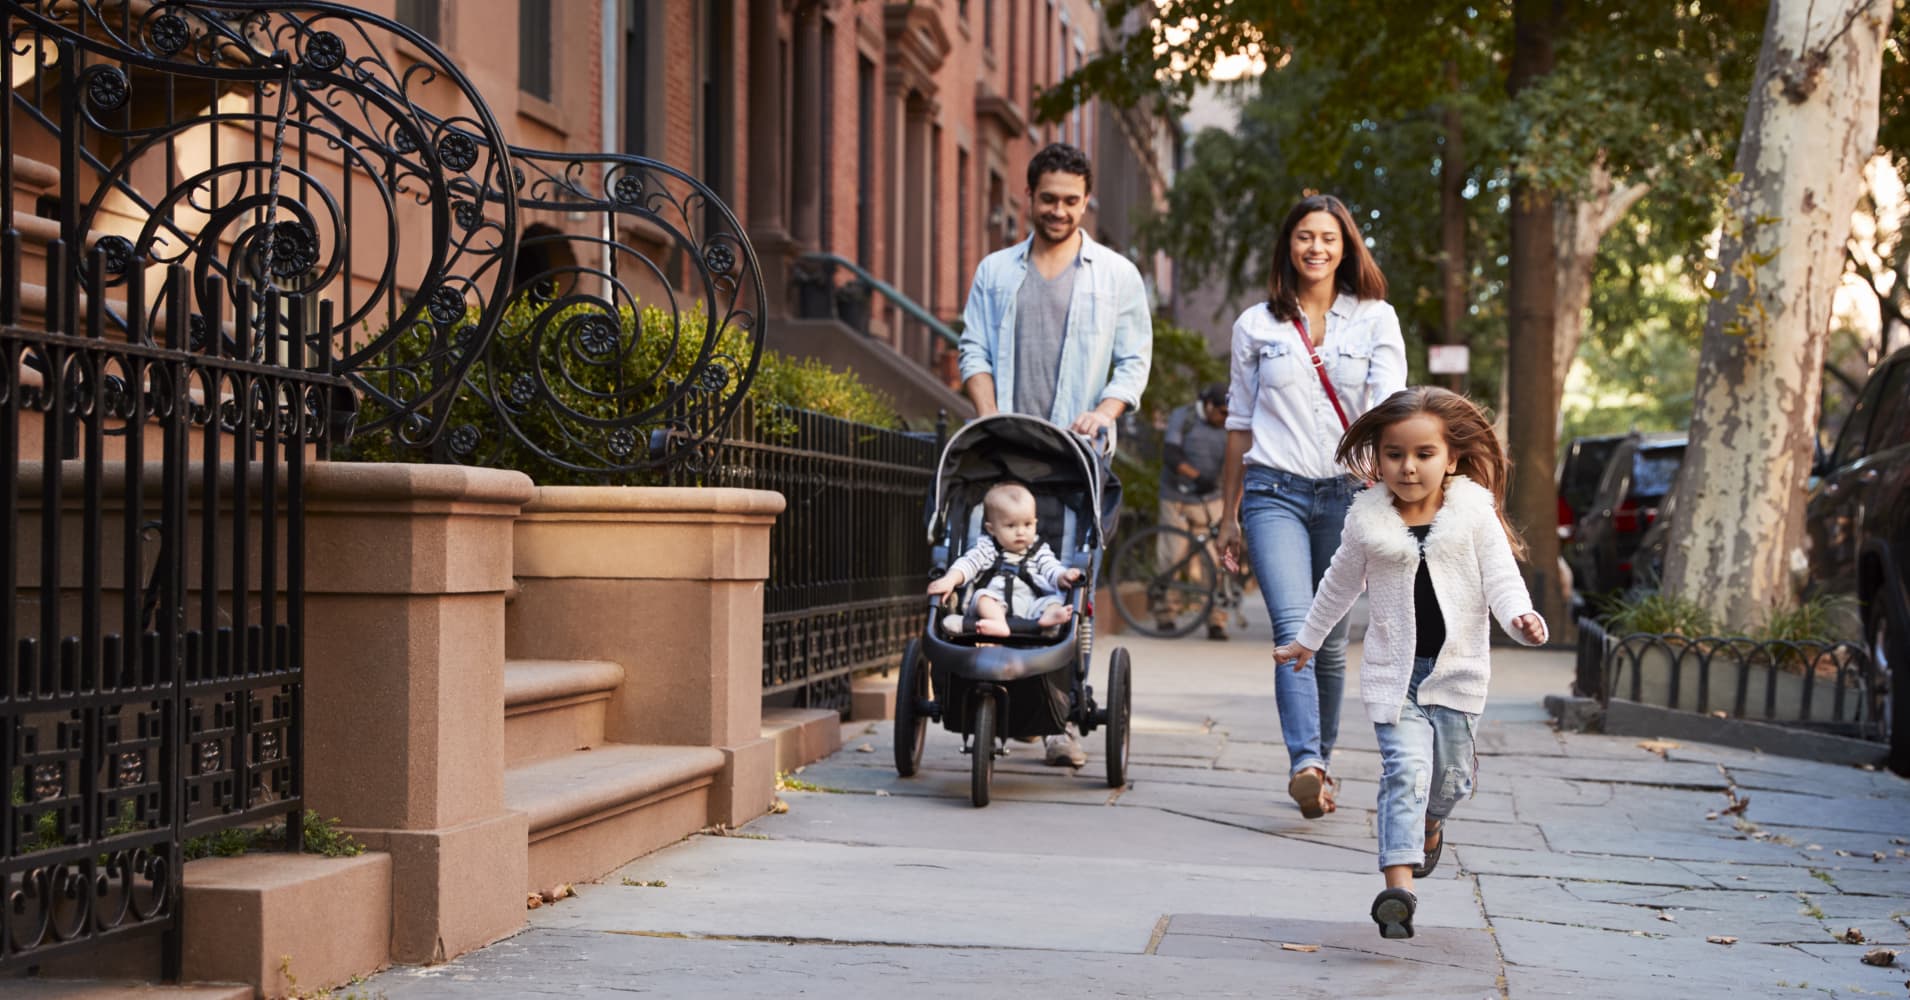 the income a family of 4 needs to live comfortably in 20 major u.s. cities